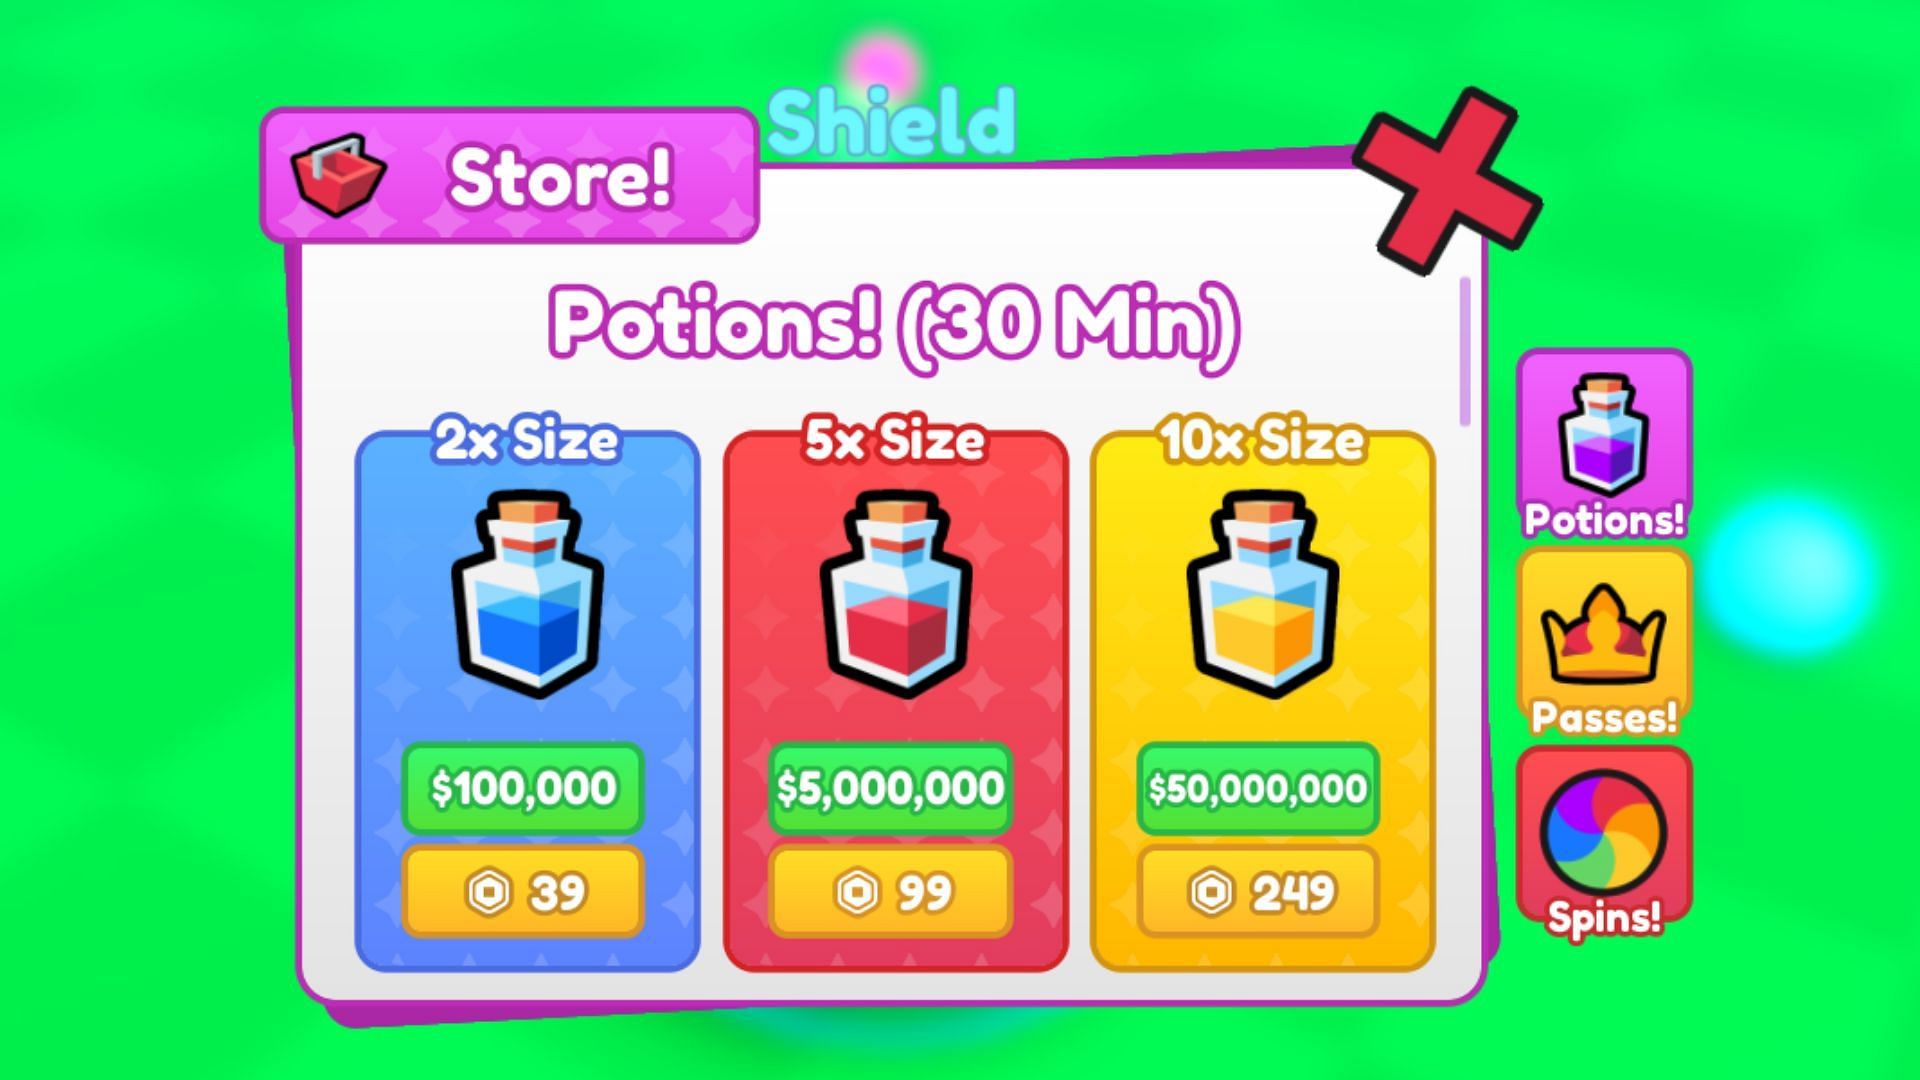 Potions, Passes &amp; Spins in Ball Eating Simulator (Image via Roblox)